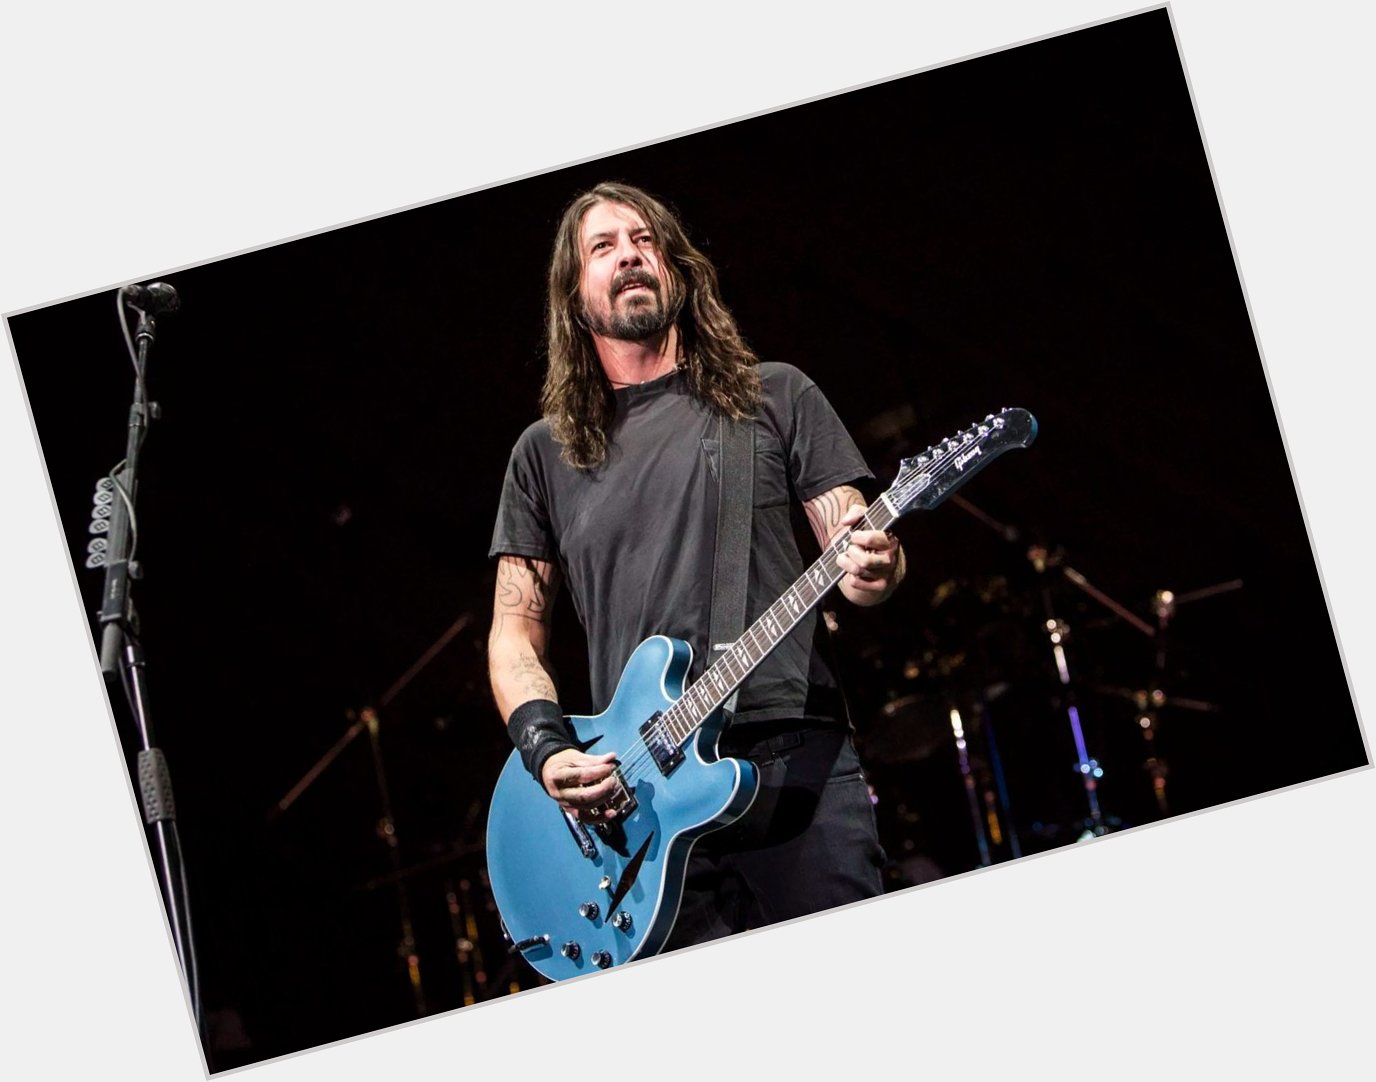 # Happy birthday to one of my favorite musicians, Dave Grohl! 